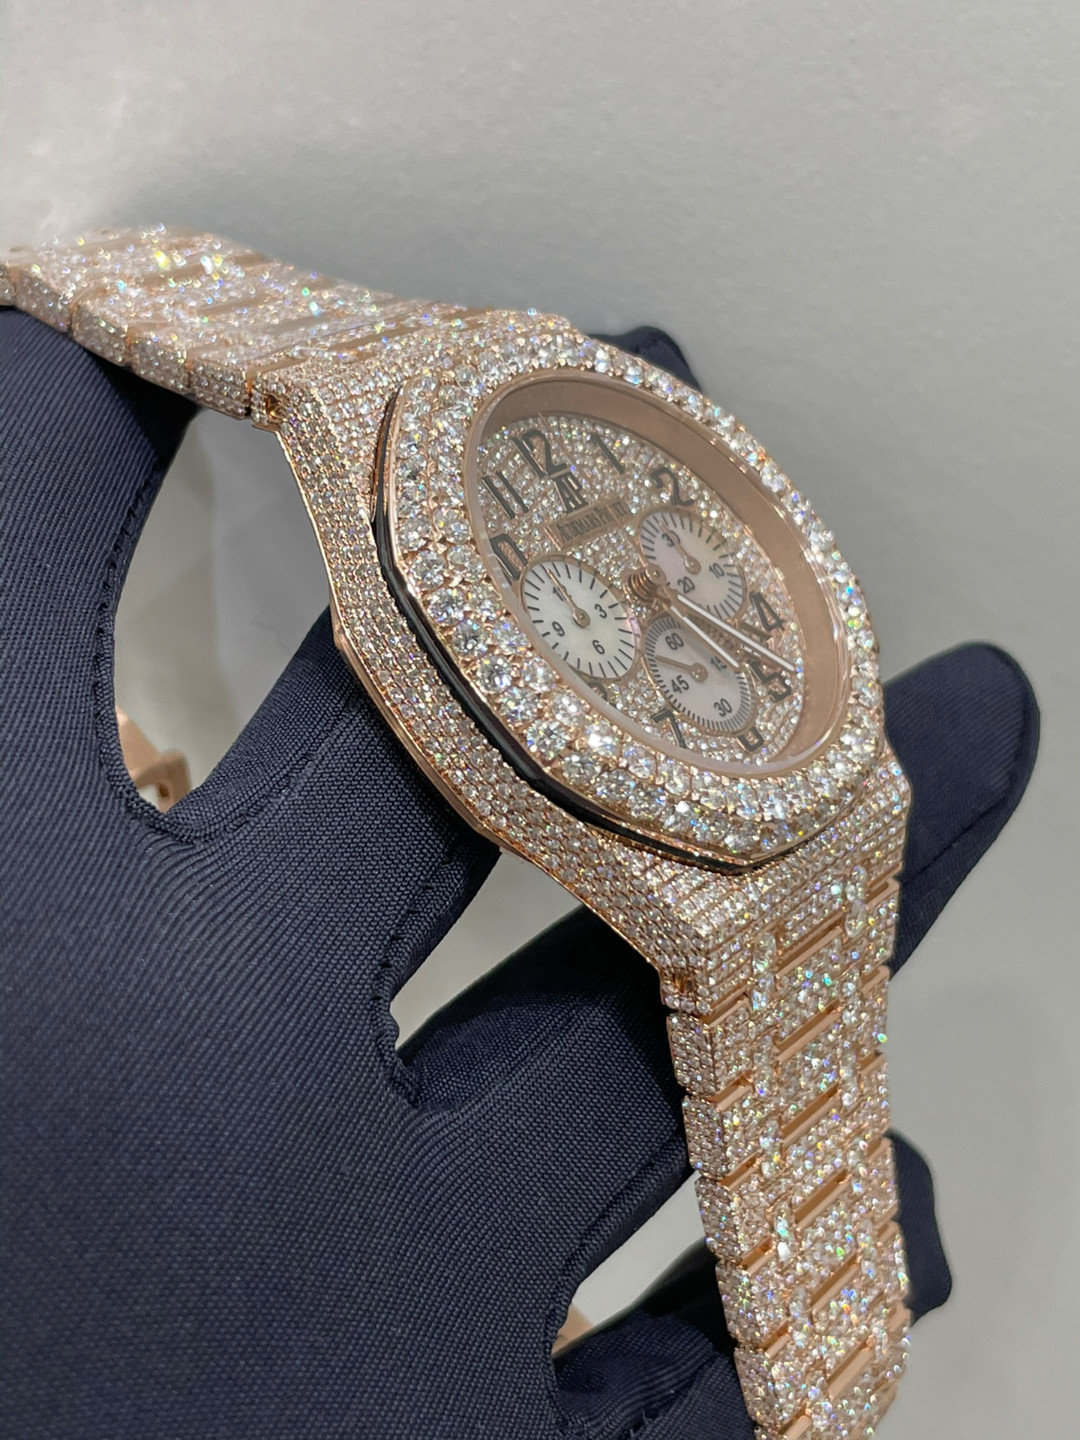  Full Diamond Luxury Watch Vvs Moissanite Watches For Man Rapper Manufactures